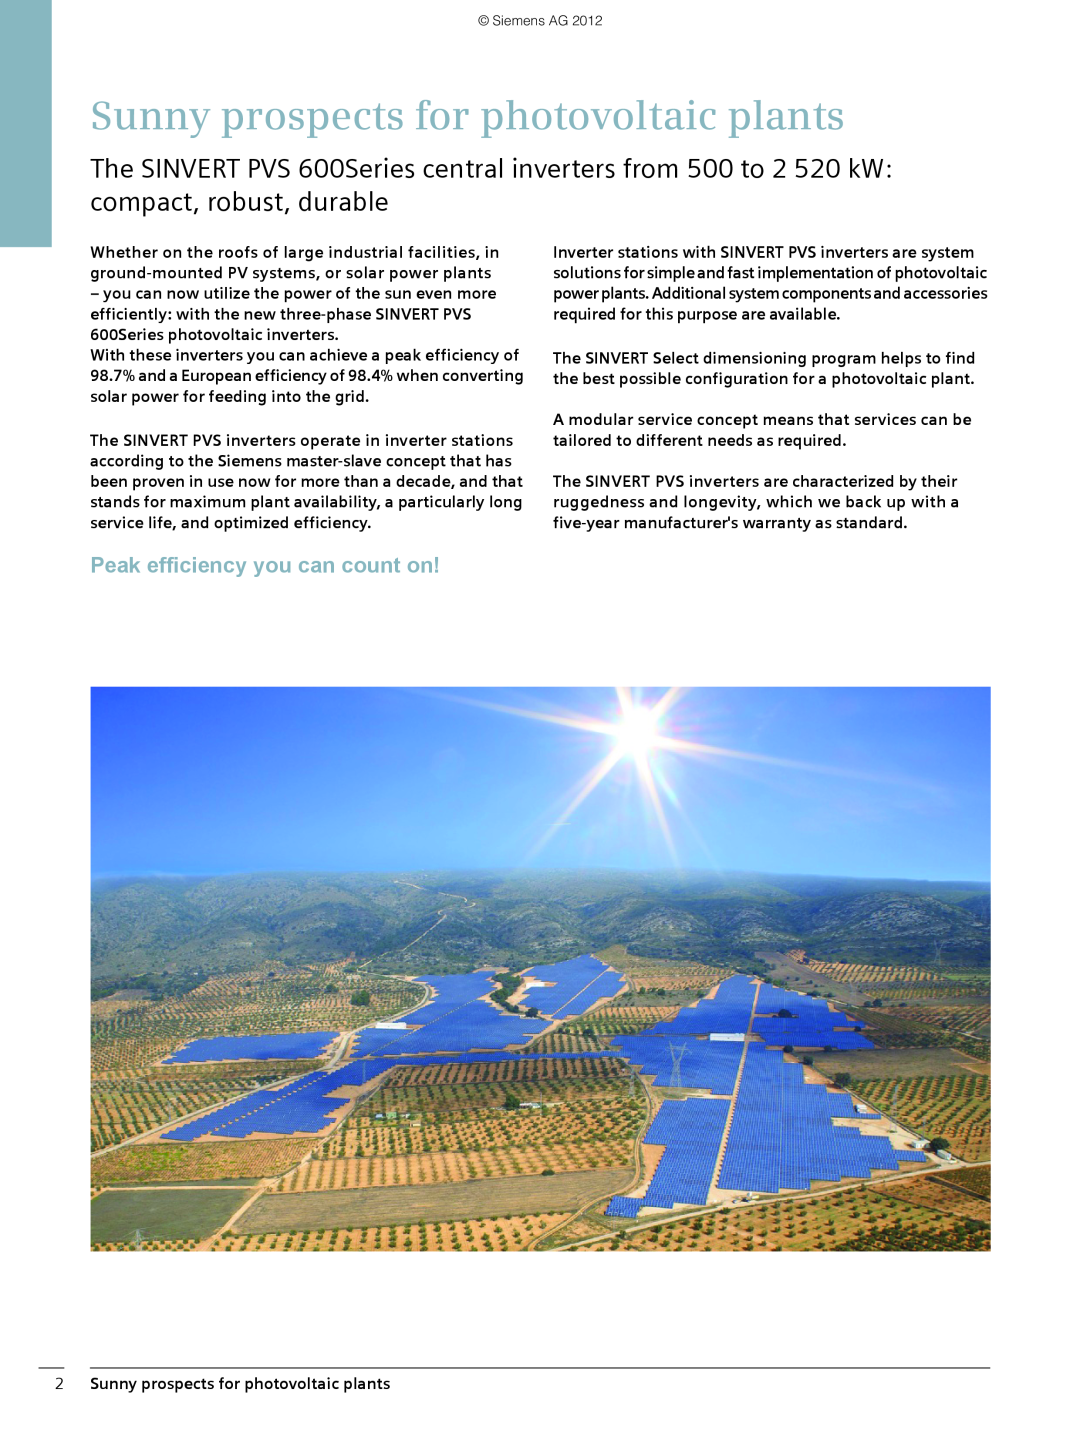 Siemens 600 brochure Peak efficiency you can count on, 2Sunny prospects for photovoltaic plants 